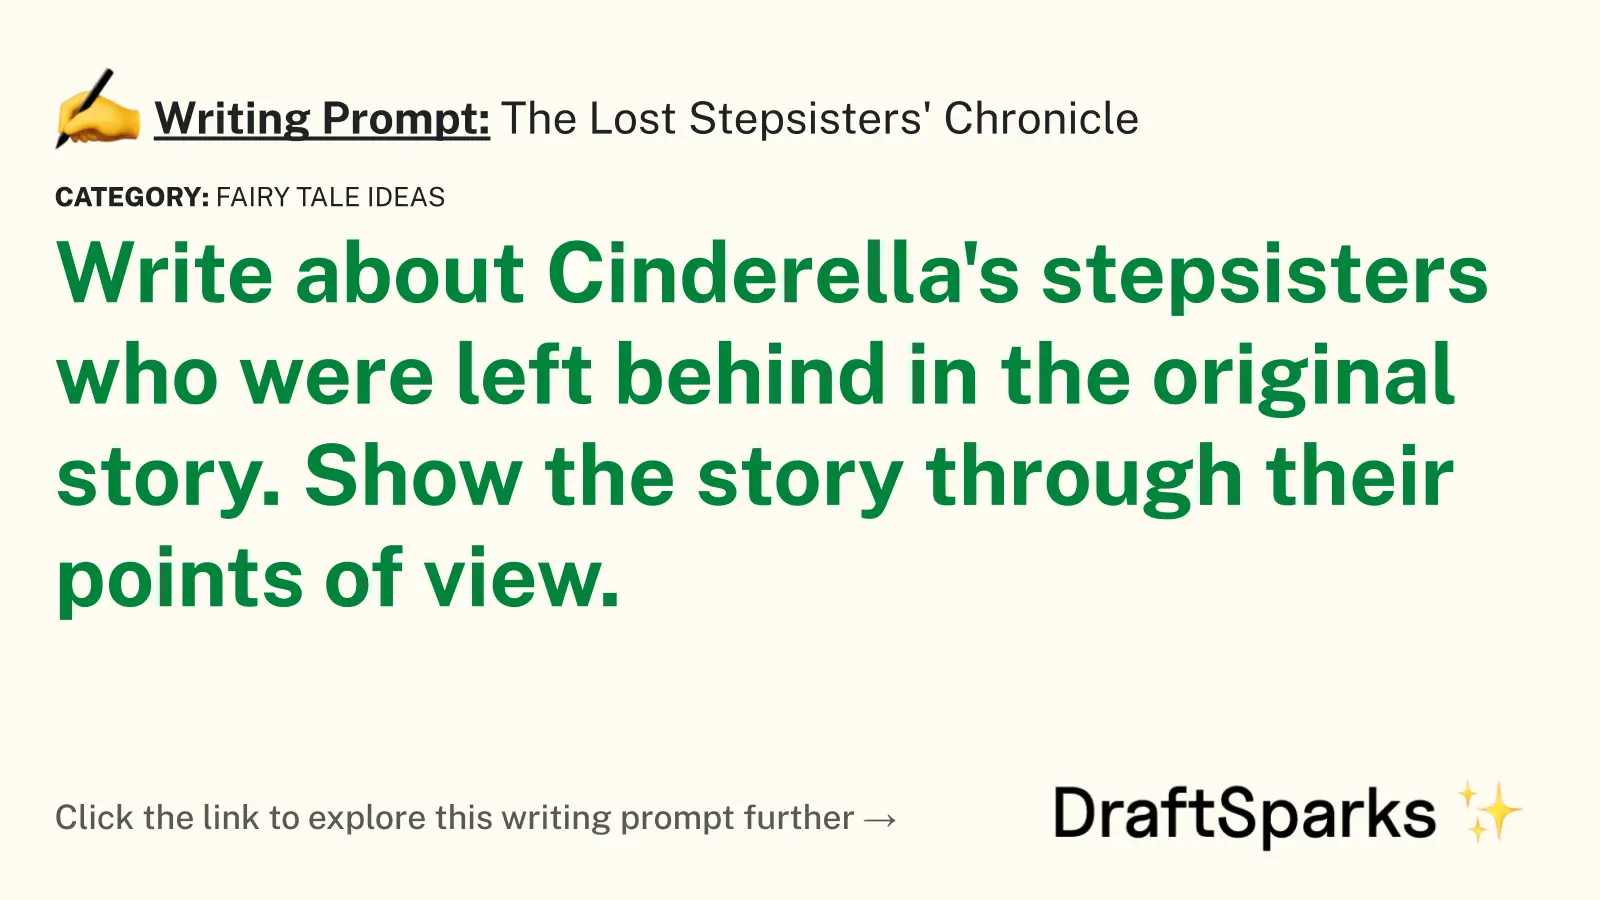 The Lost Stepsisters’ Chronicle